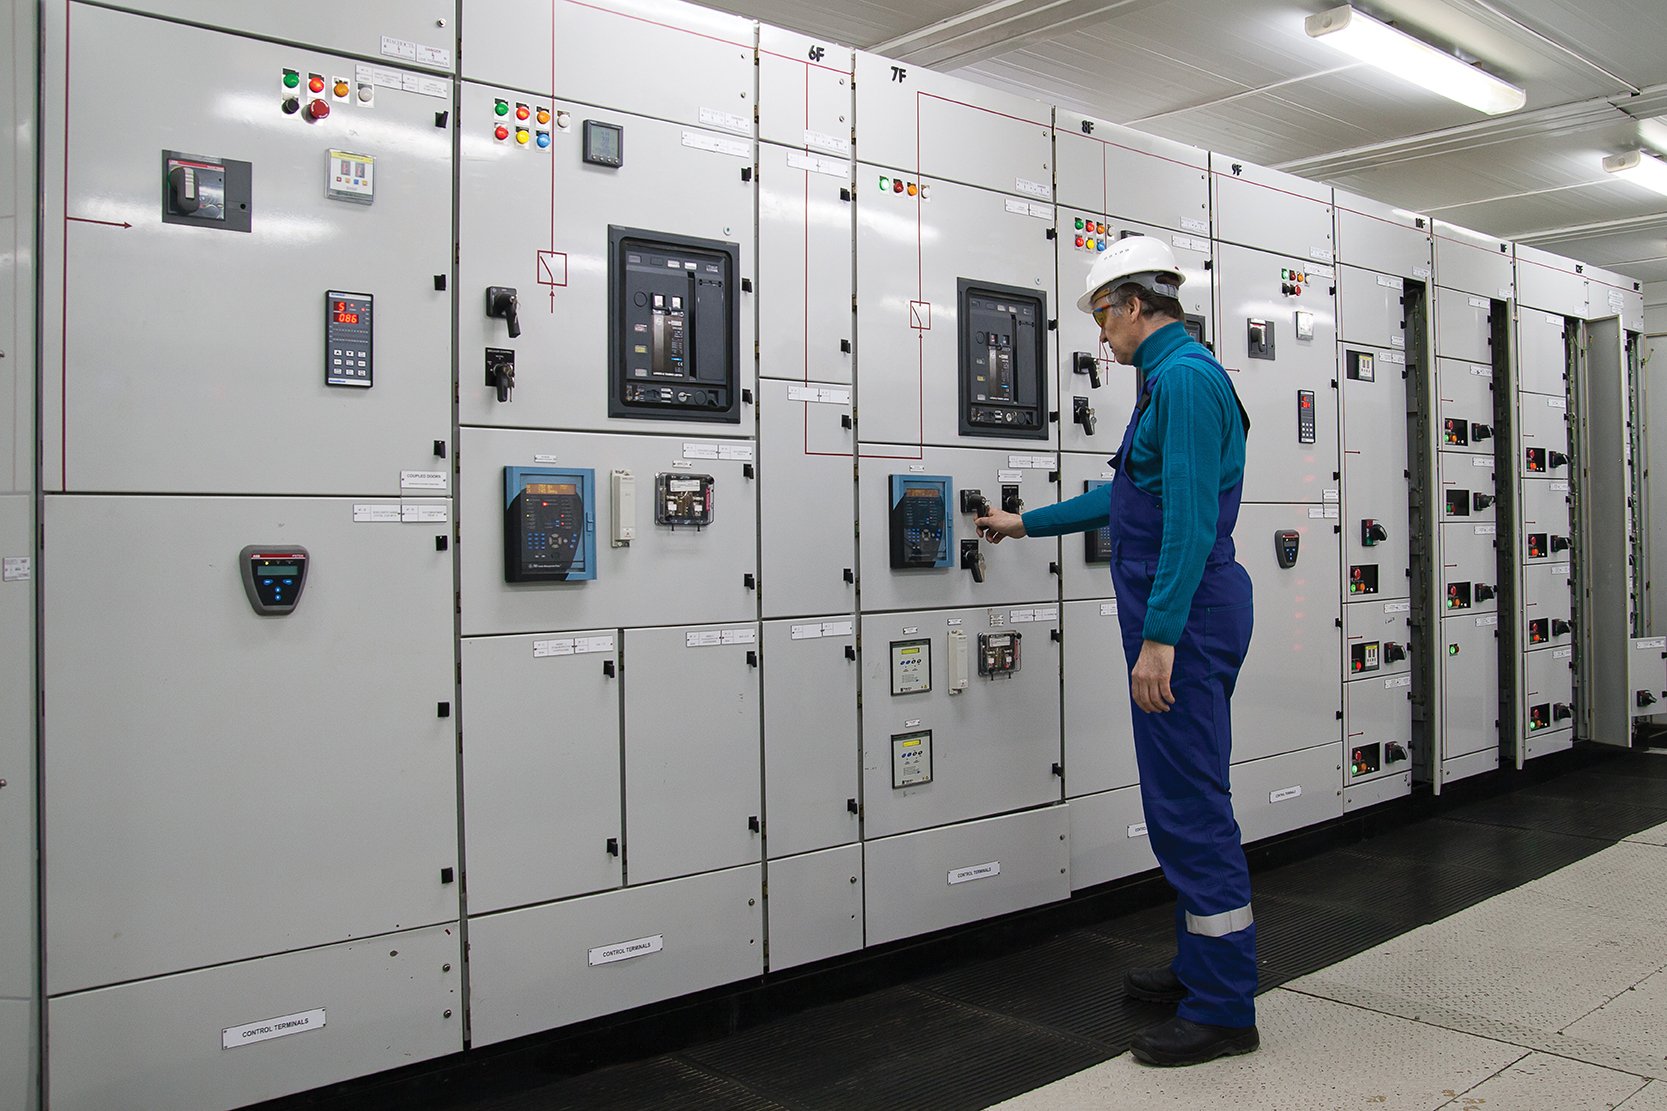 Low Voltage Motor Control Center Market to Reach US$3,807.5 Million by 2022